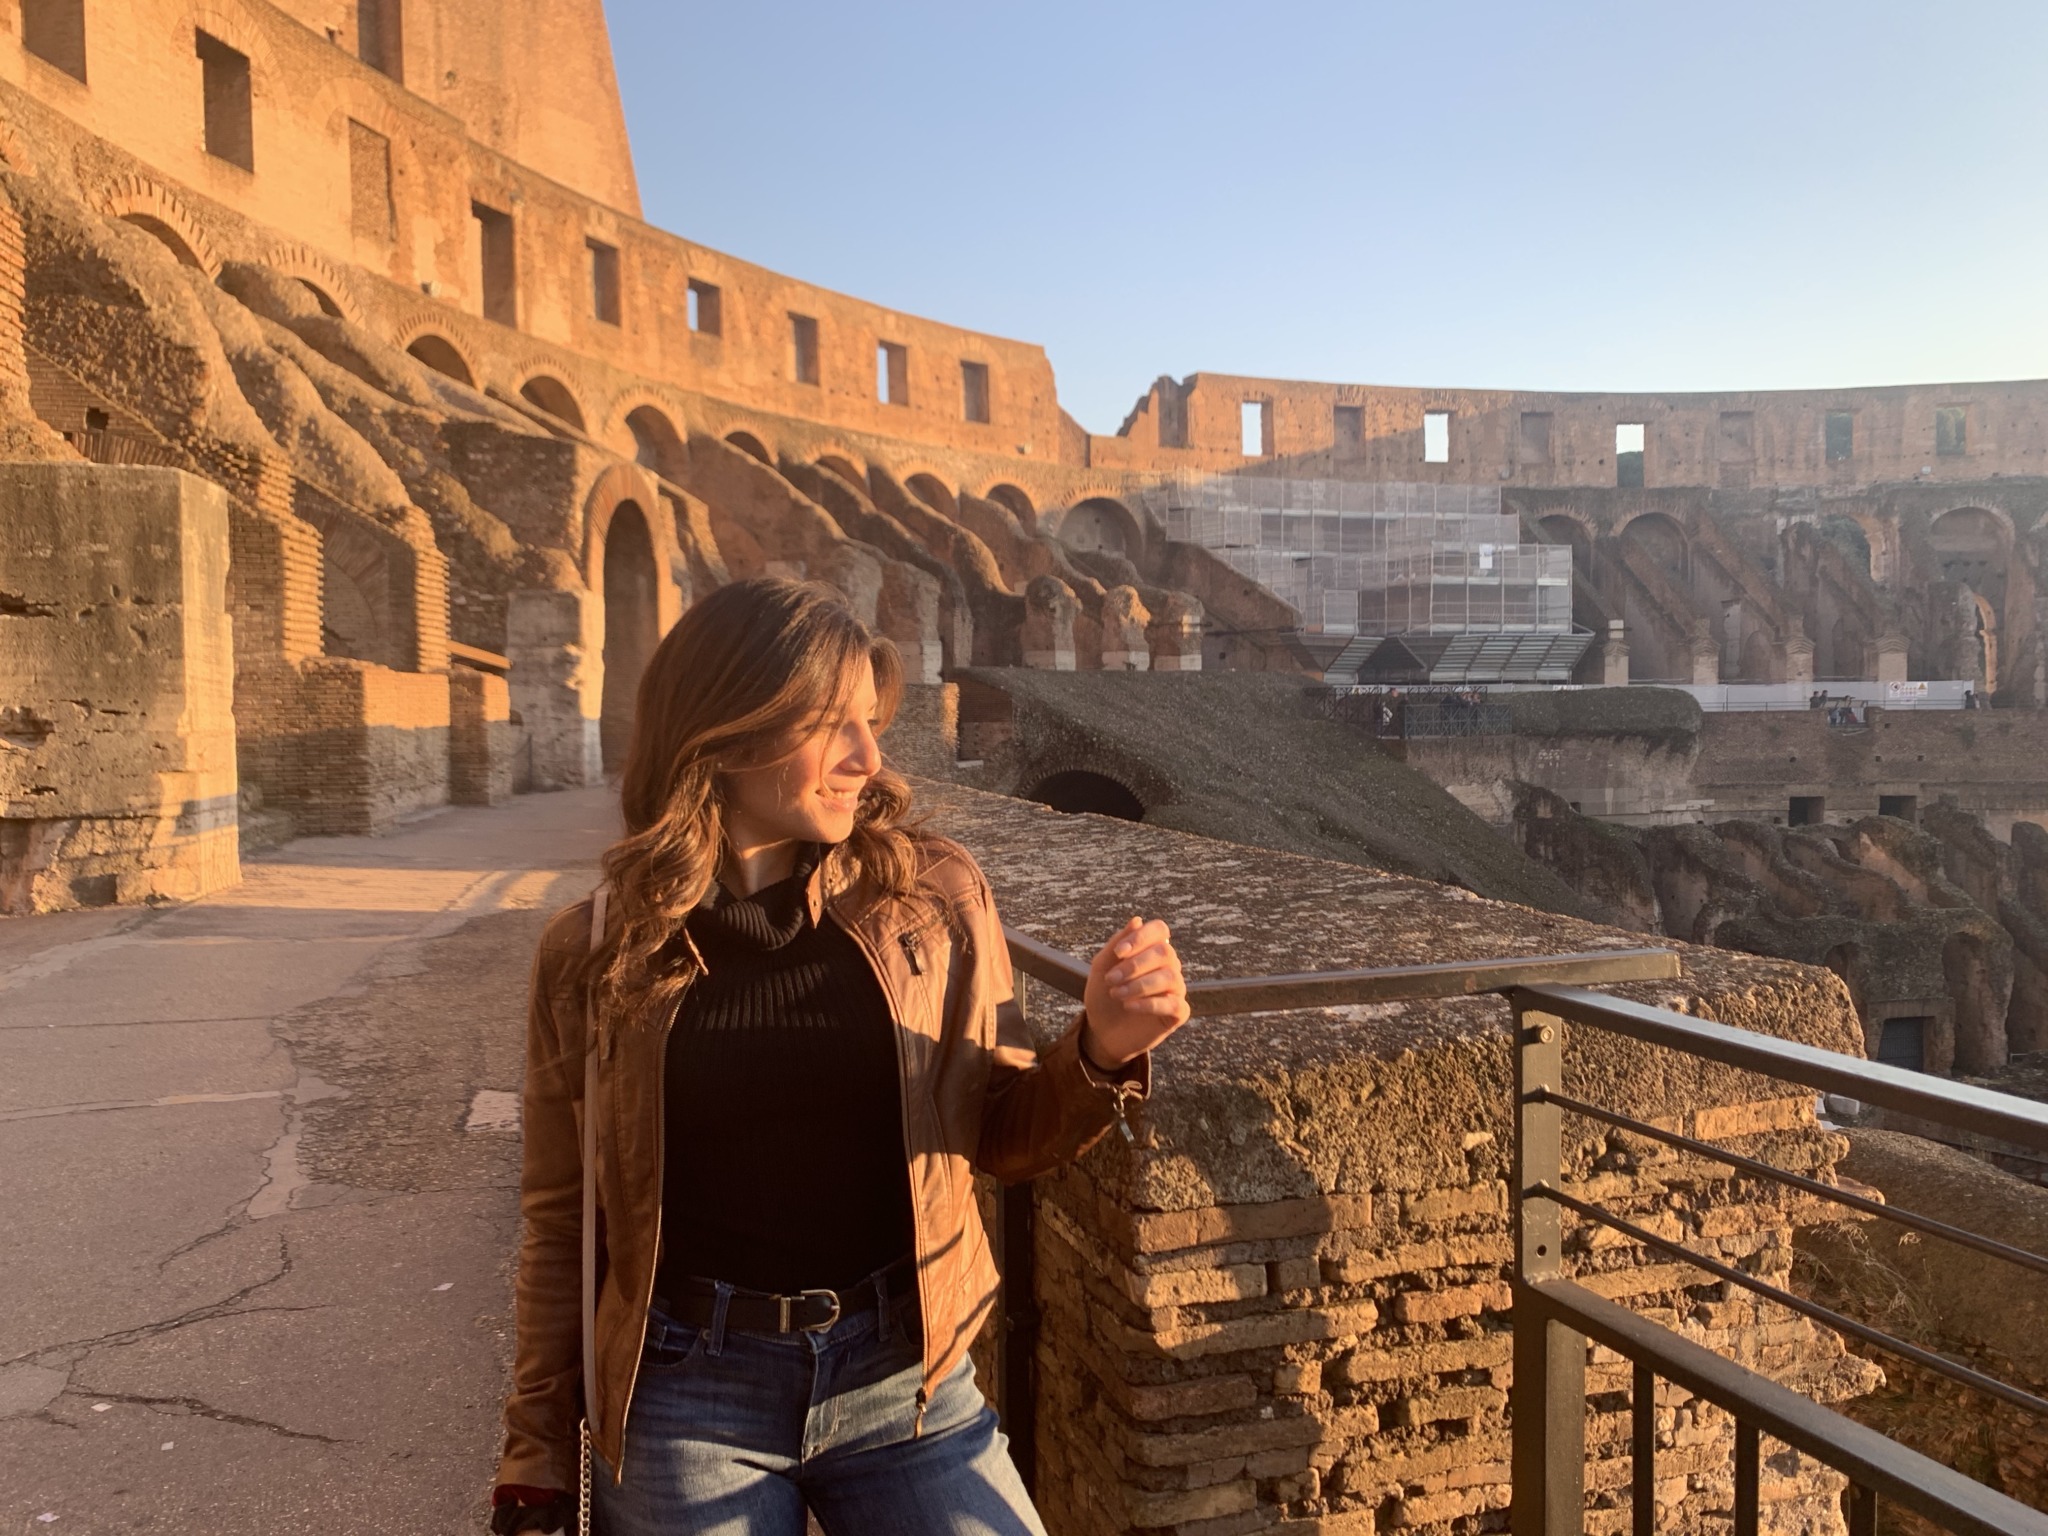 My Short-Term Study Abroad Experience in Italy Pre-COVID